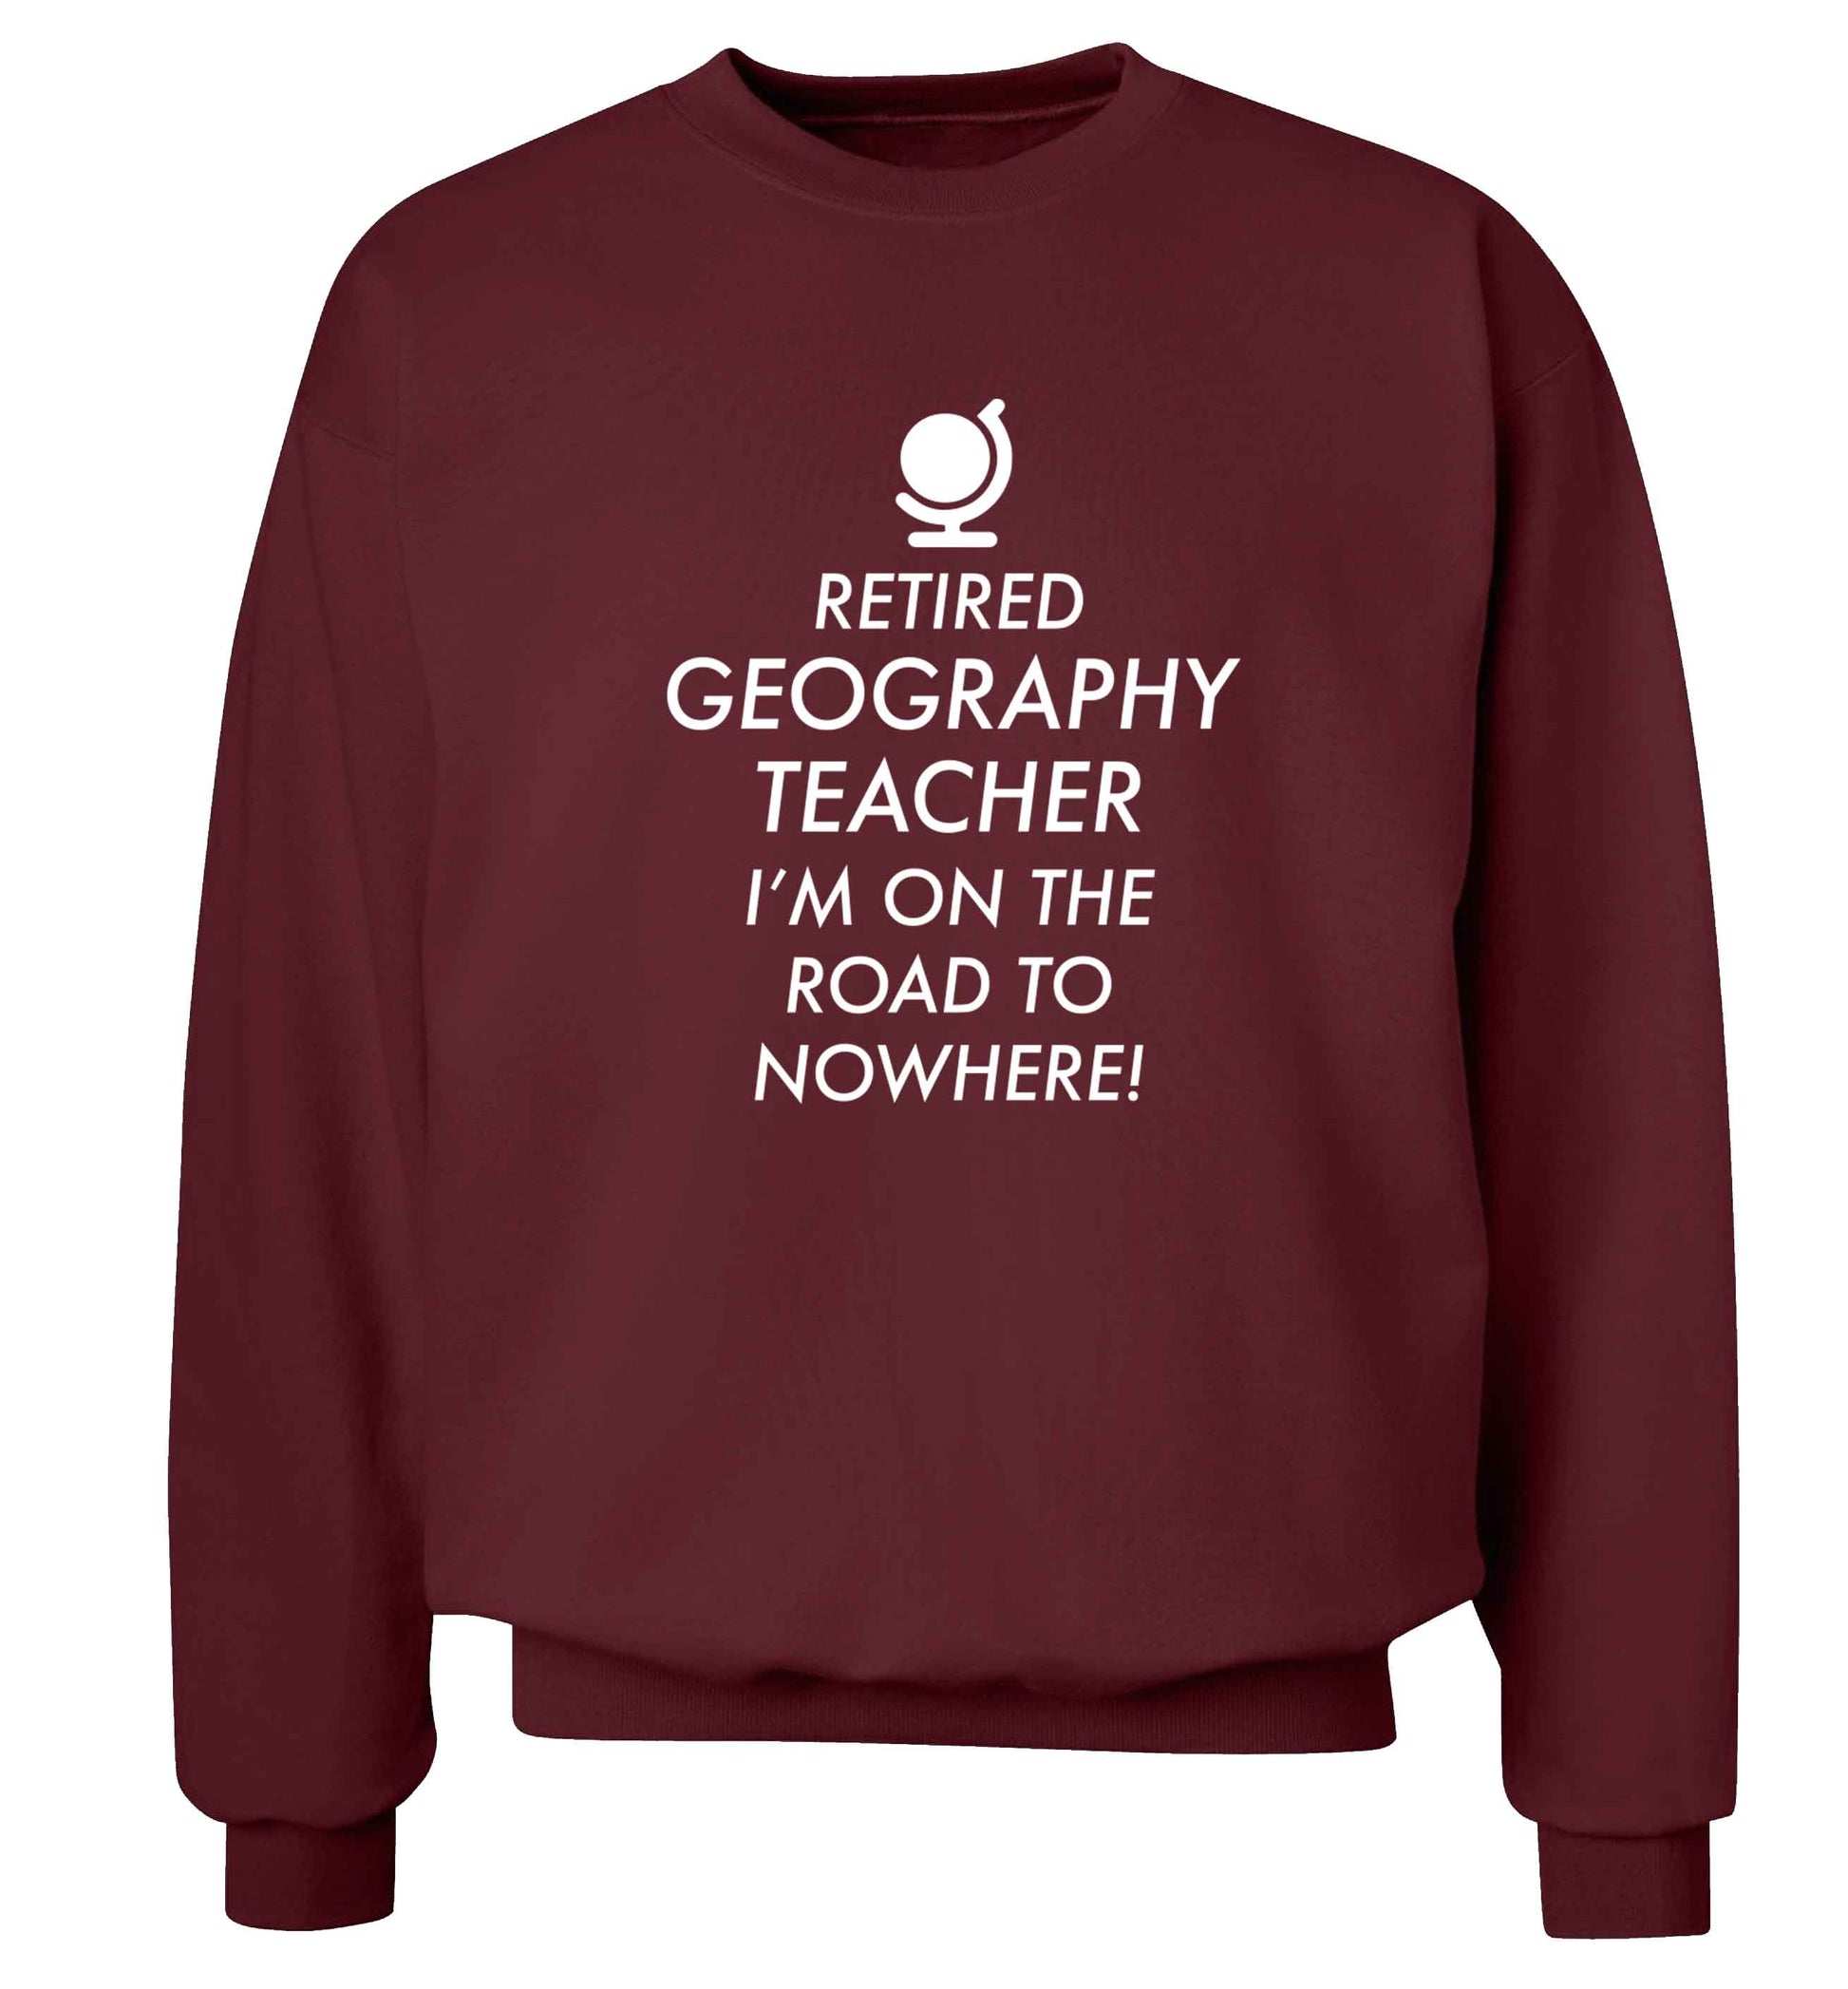 Retired geography teacher I'm on the road to nowhere Adult's unisex maroon Sweater 2XL